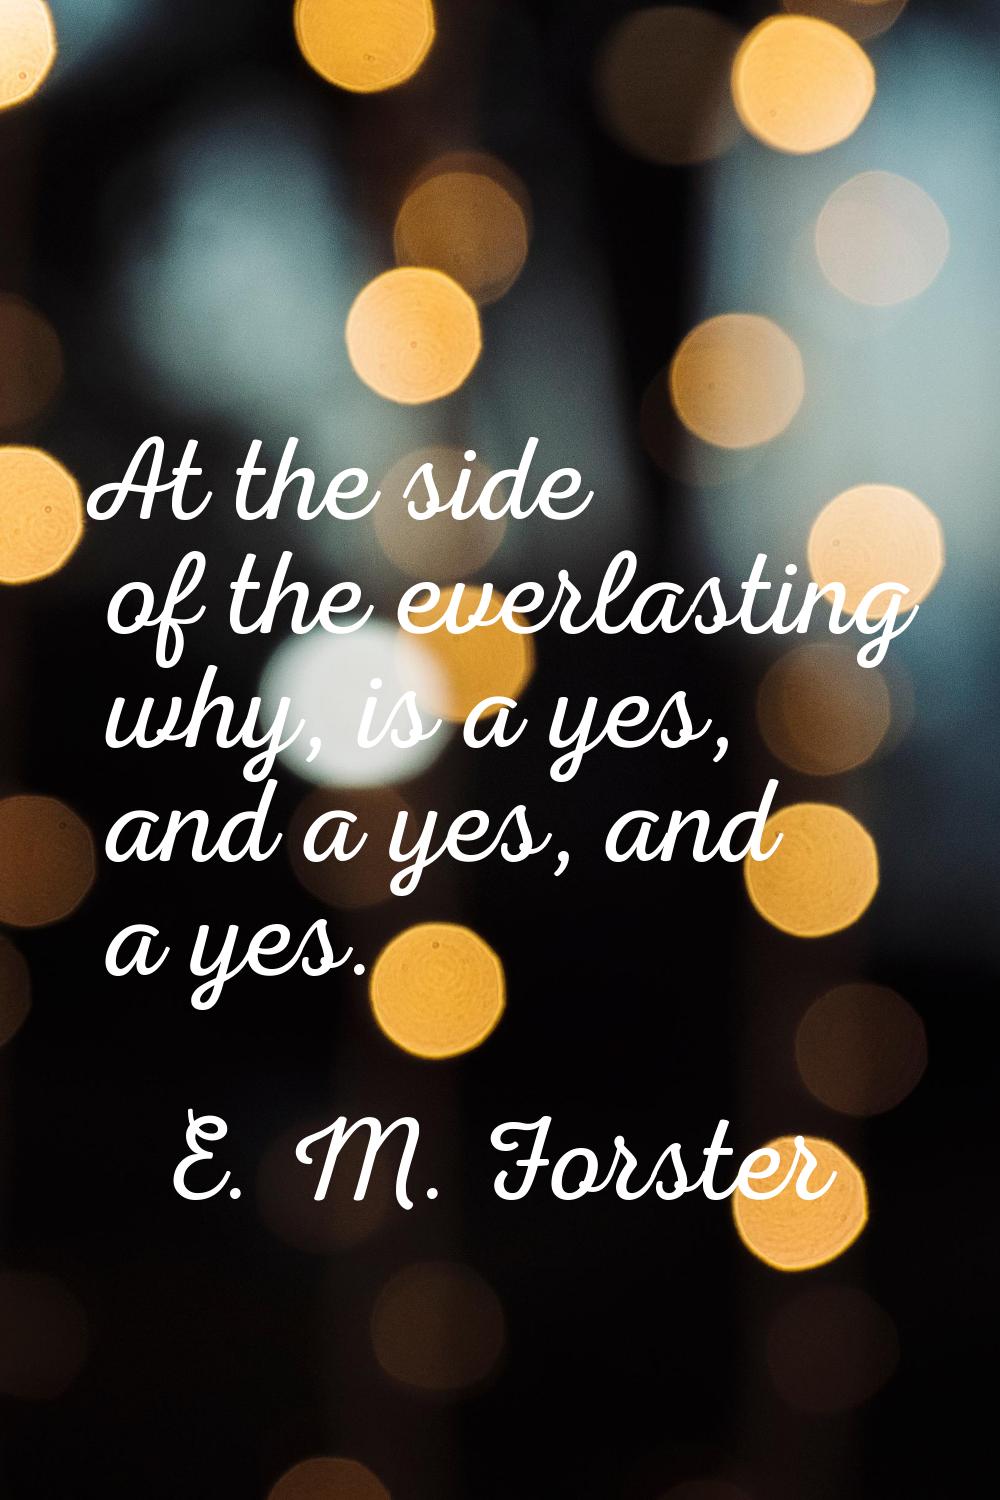 At the side of the everlasting why, is a yes, and a yes, and a yes.